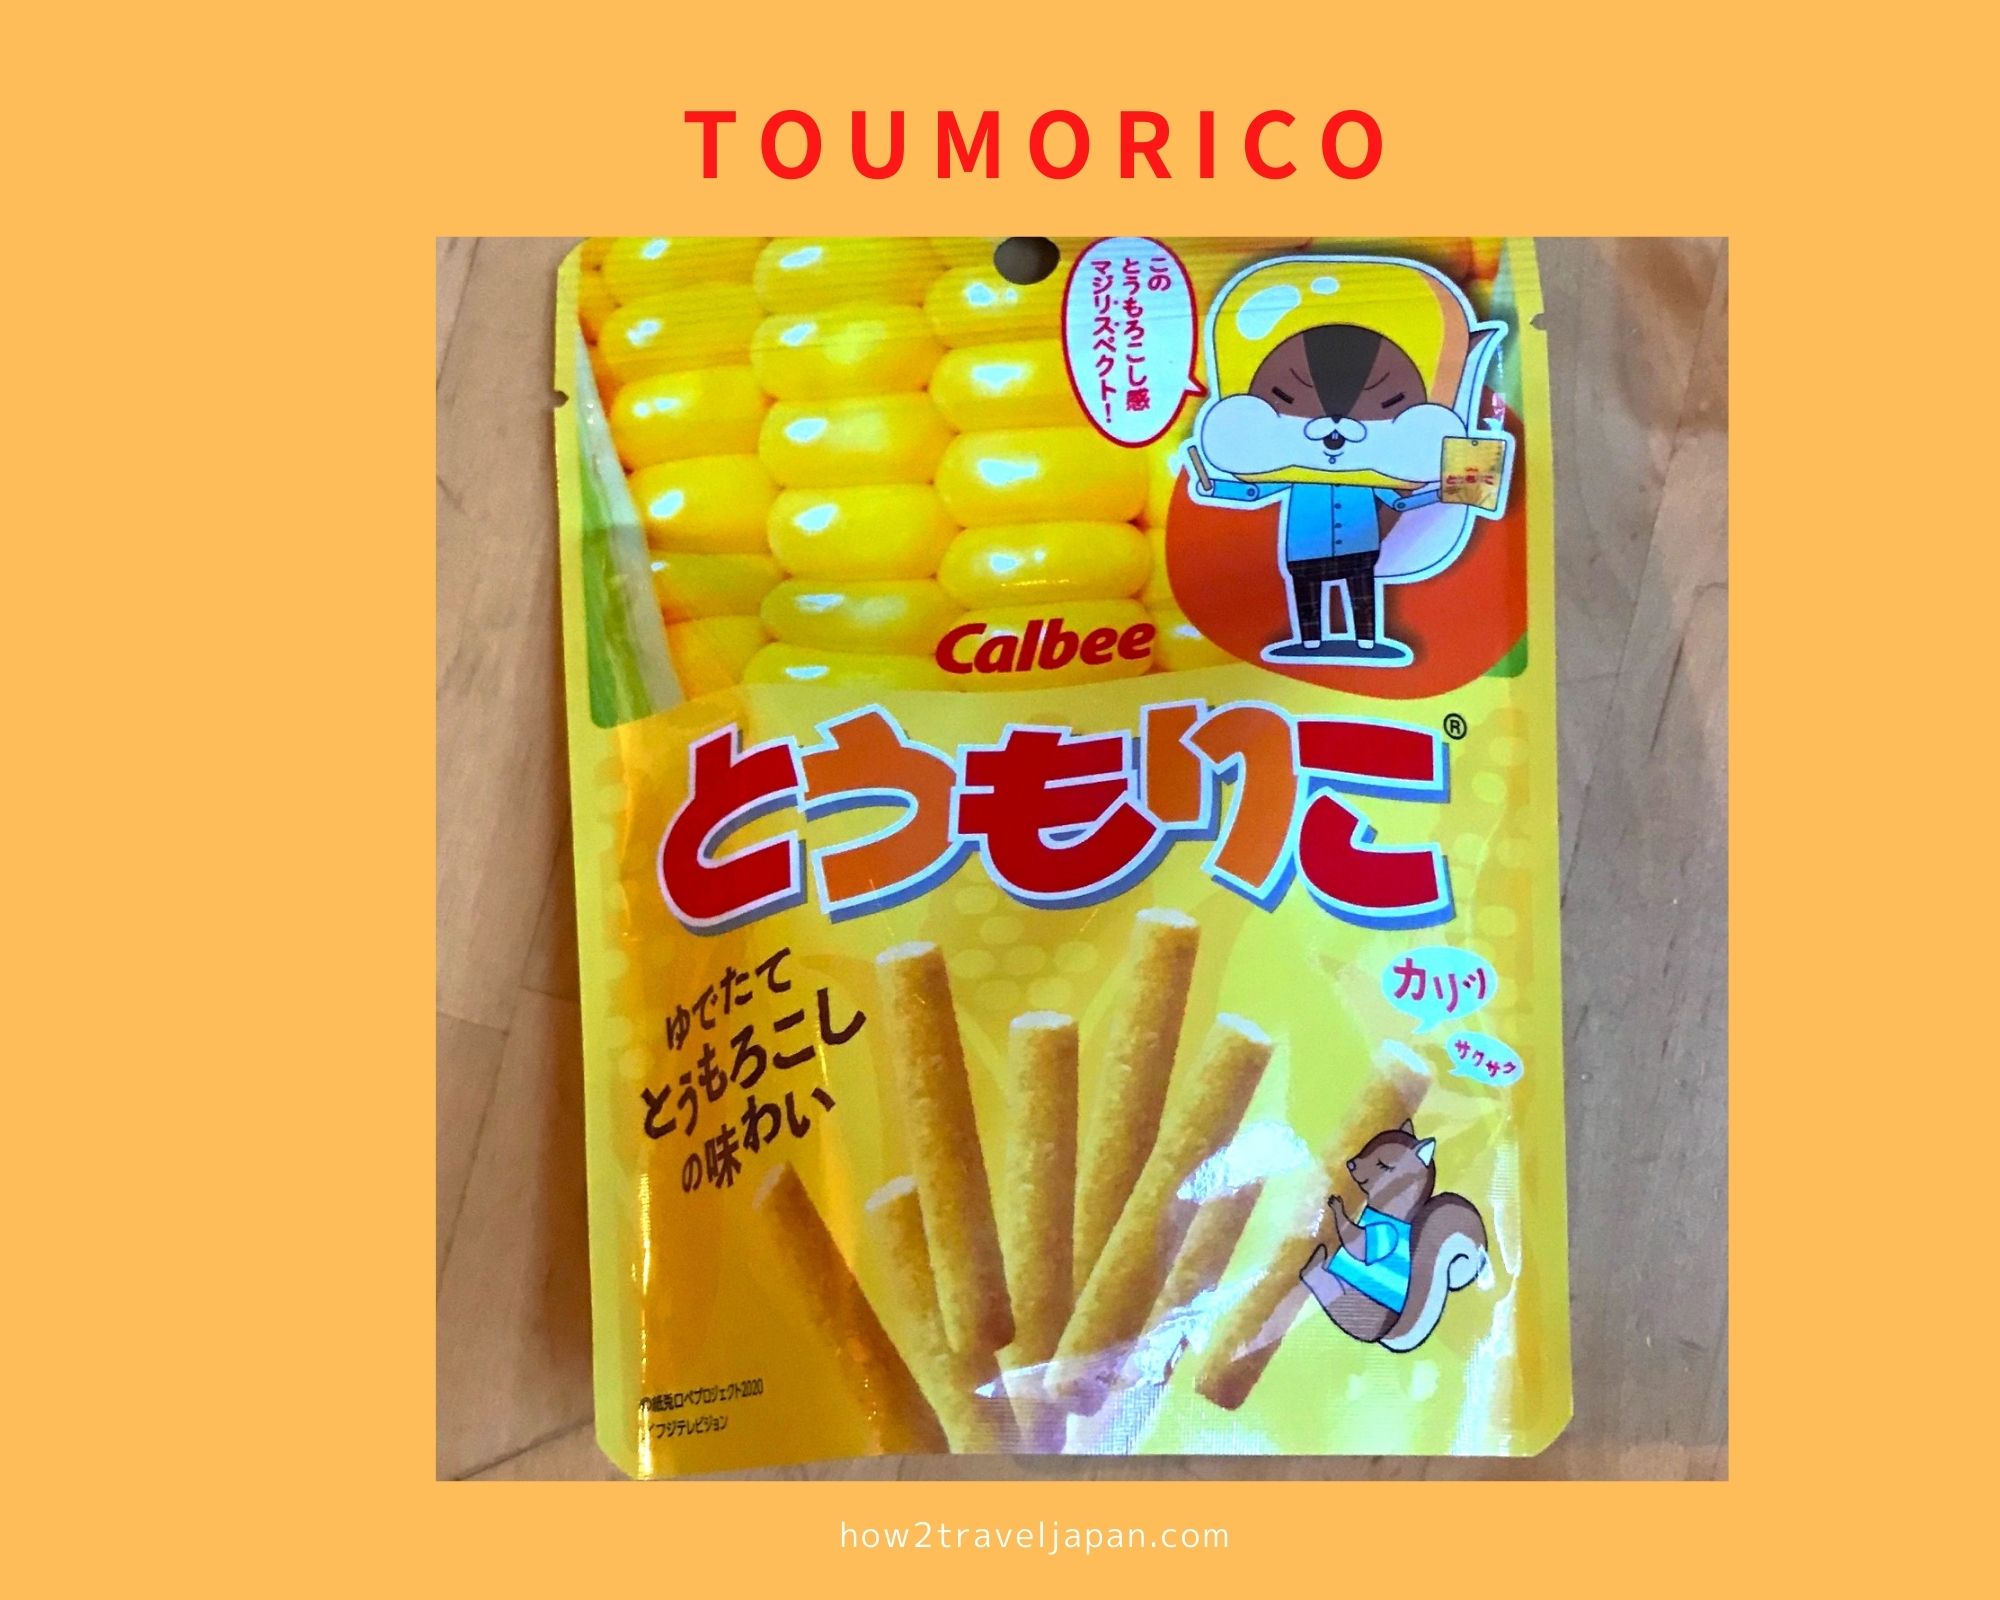 You are currently viewing Toumorico, a corn snack from Calbee